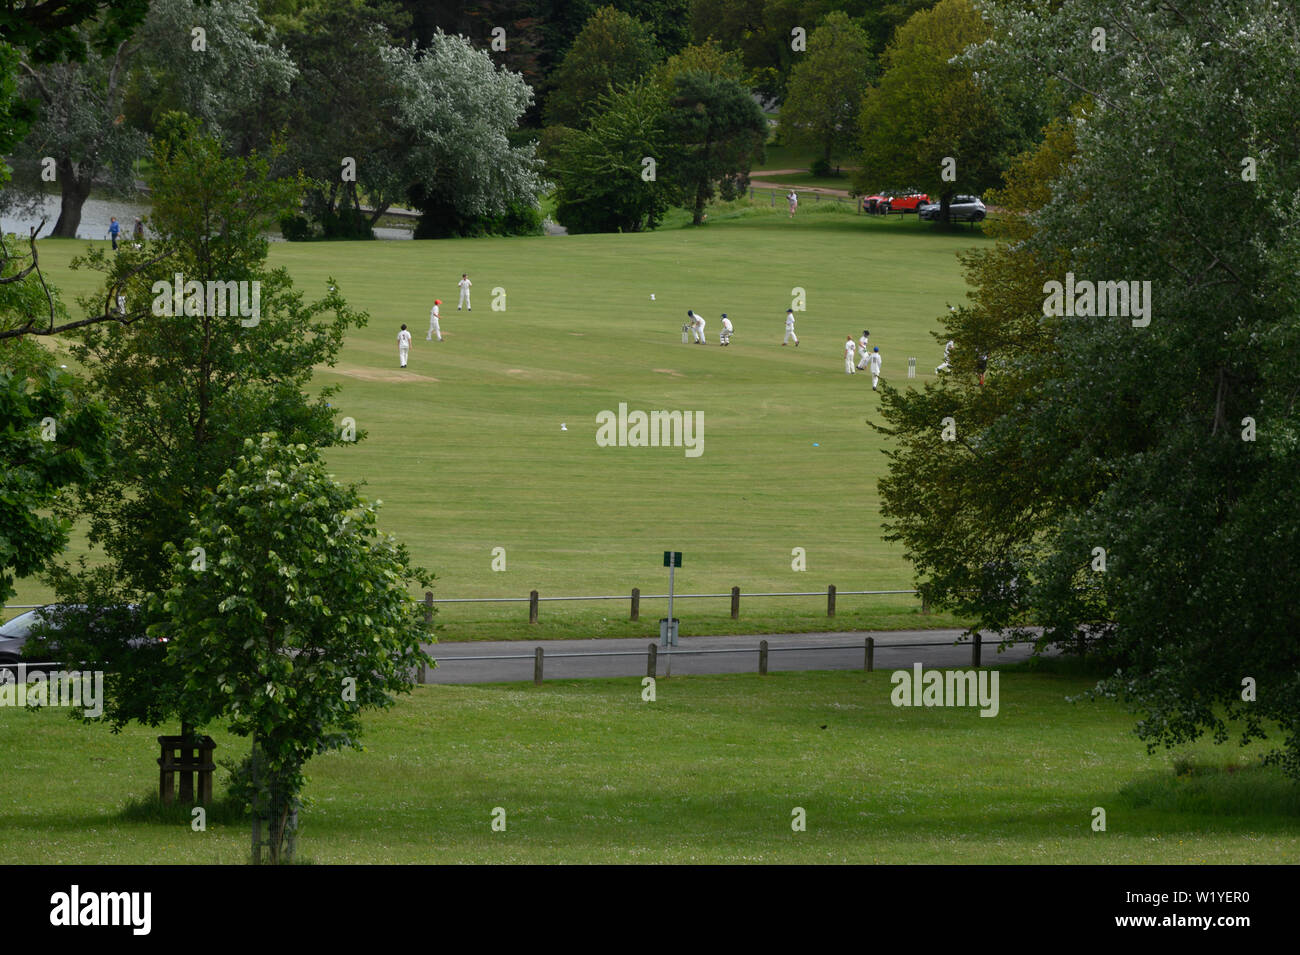 English cricketers playing on a field in the countryside Stock Photo